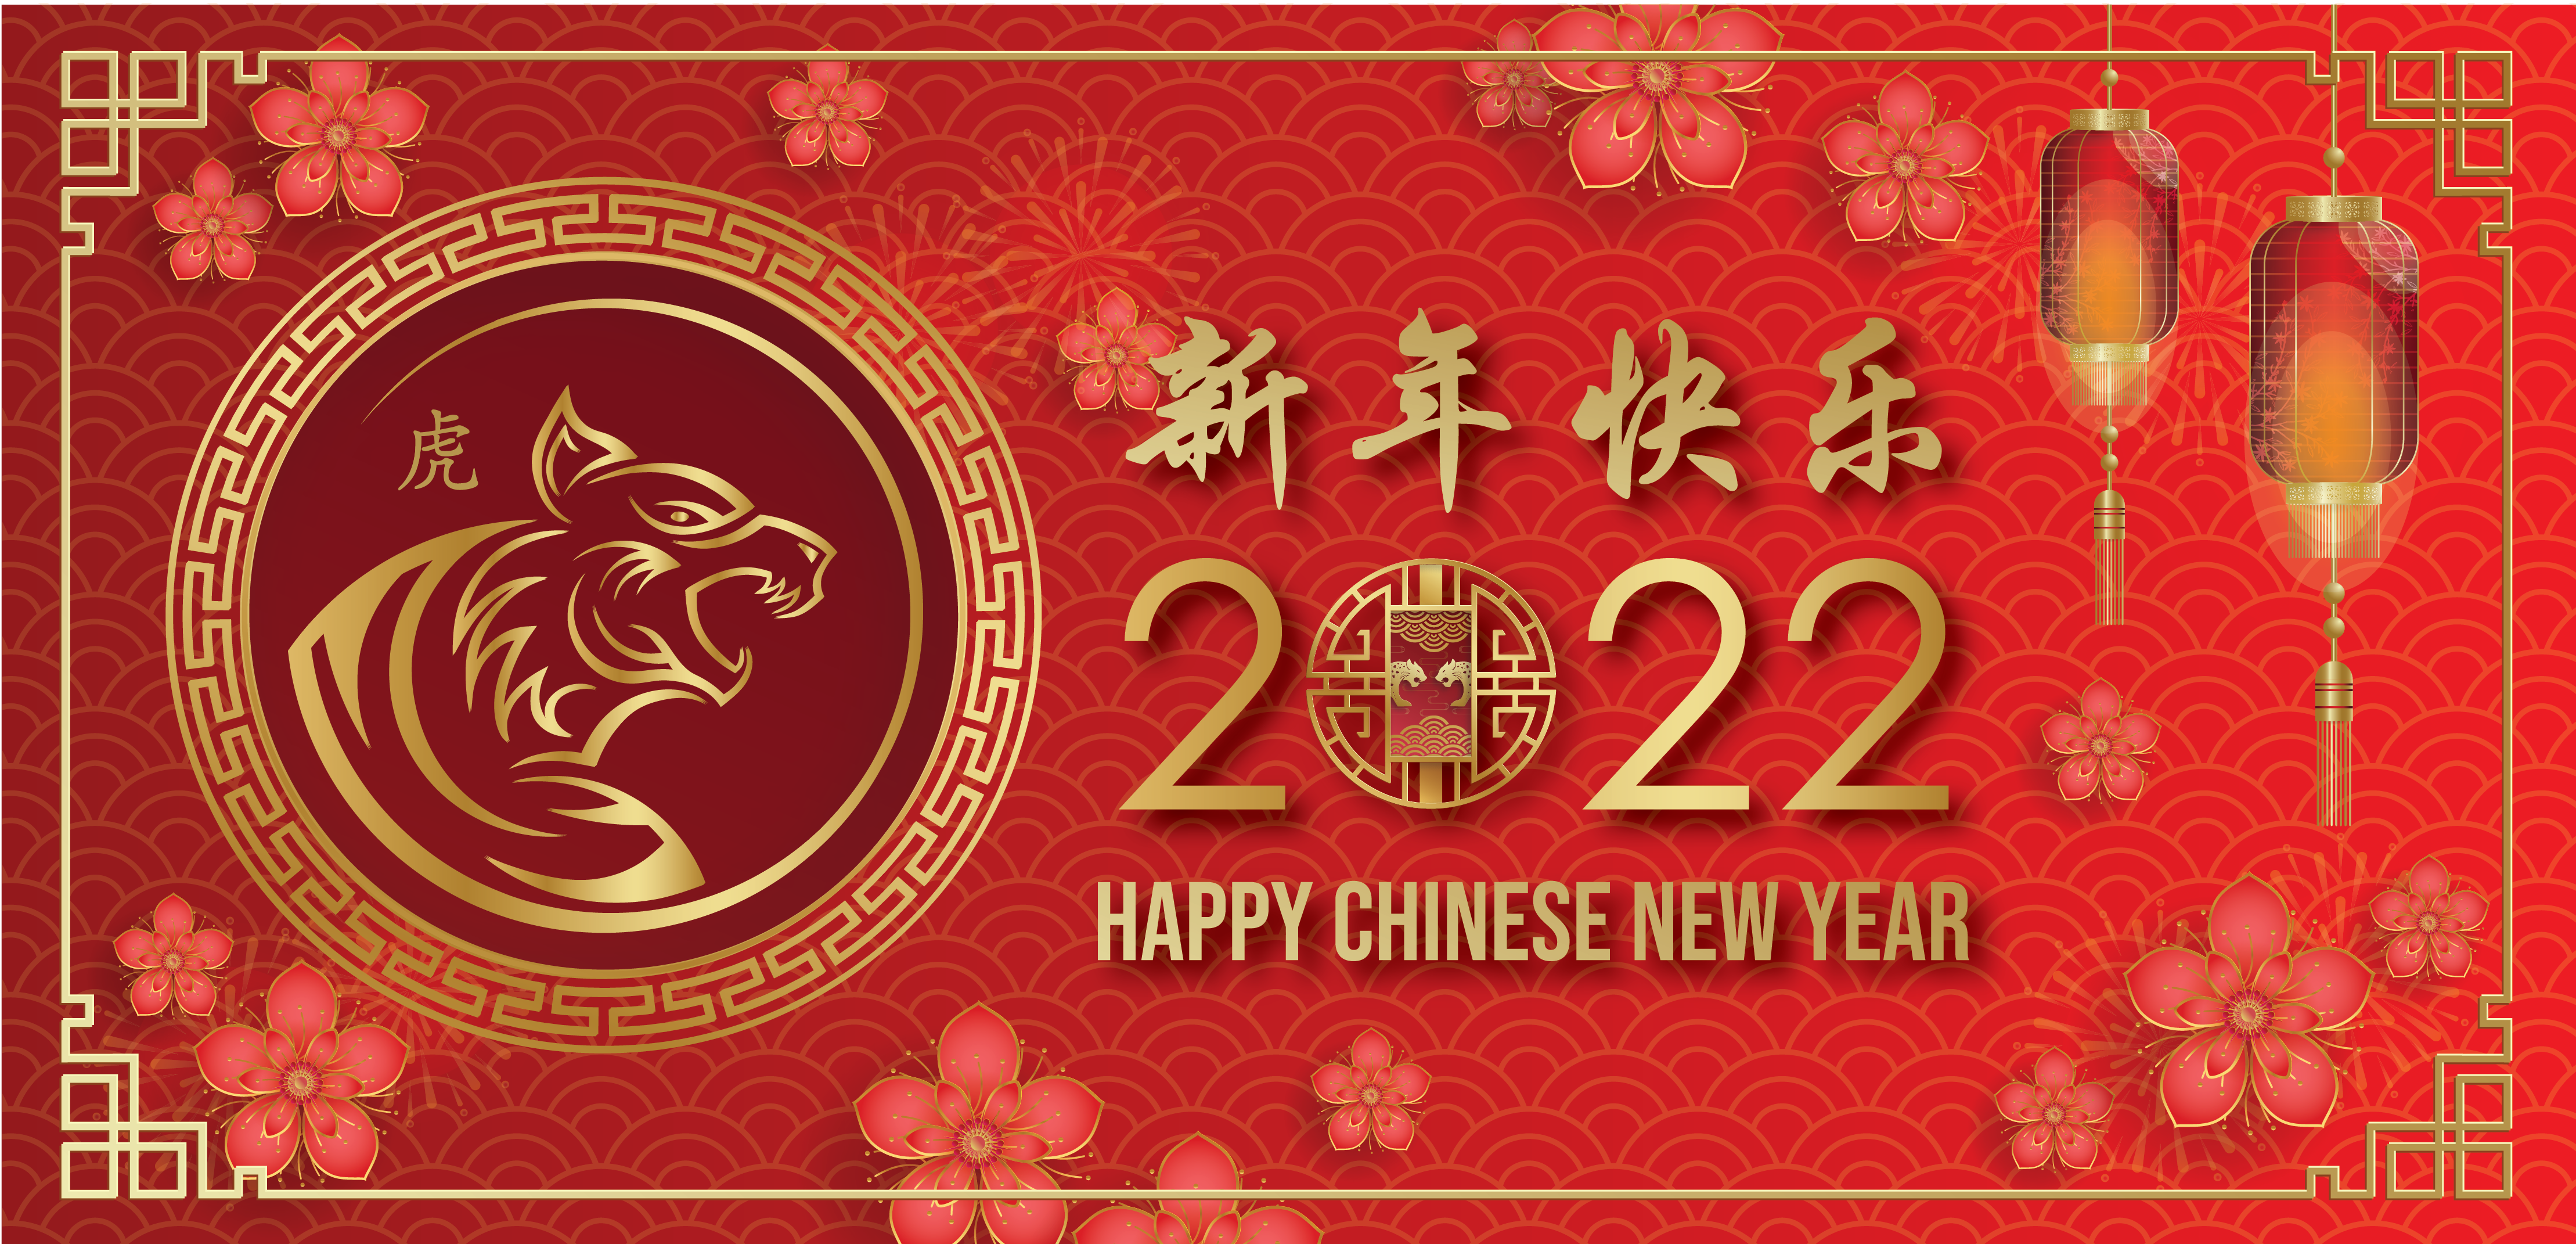 Chinese New Year Facebook Banner